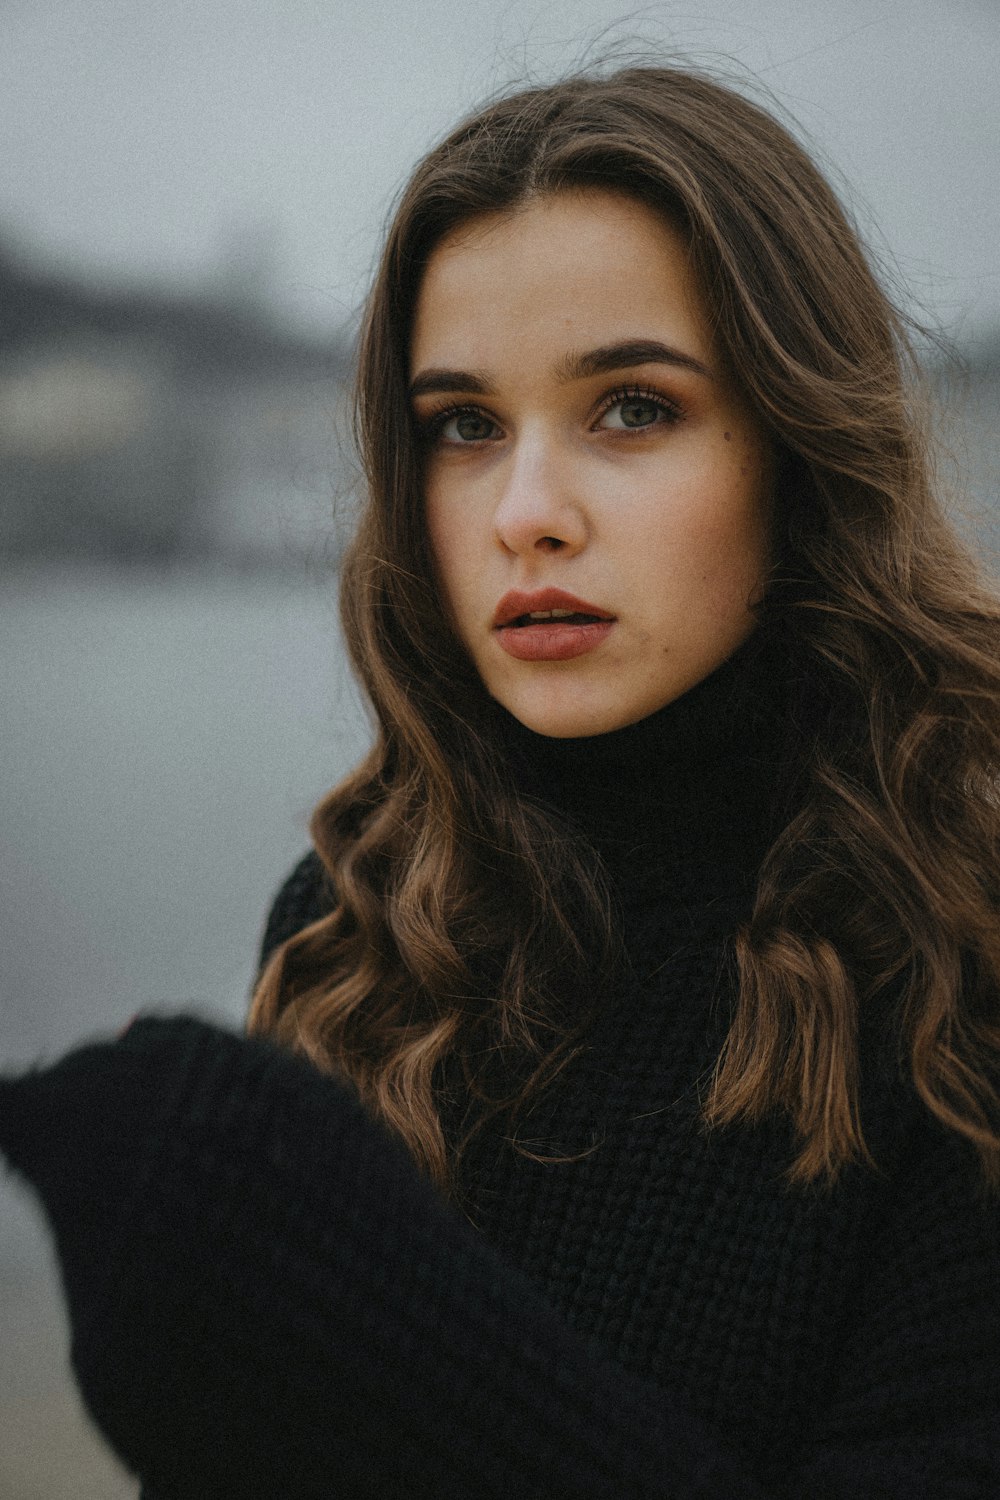 a woman with long hair wearing a black sweater